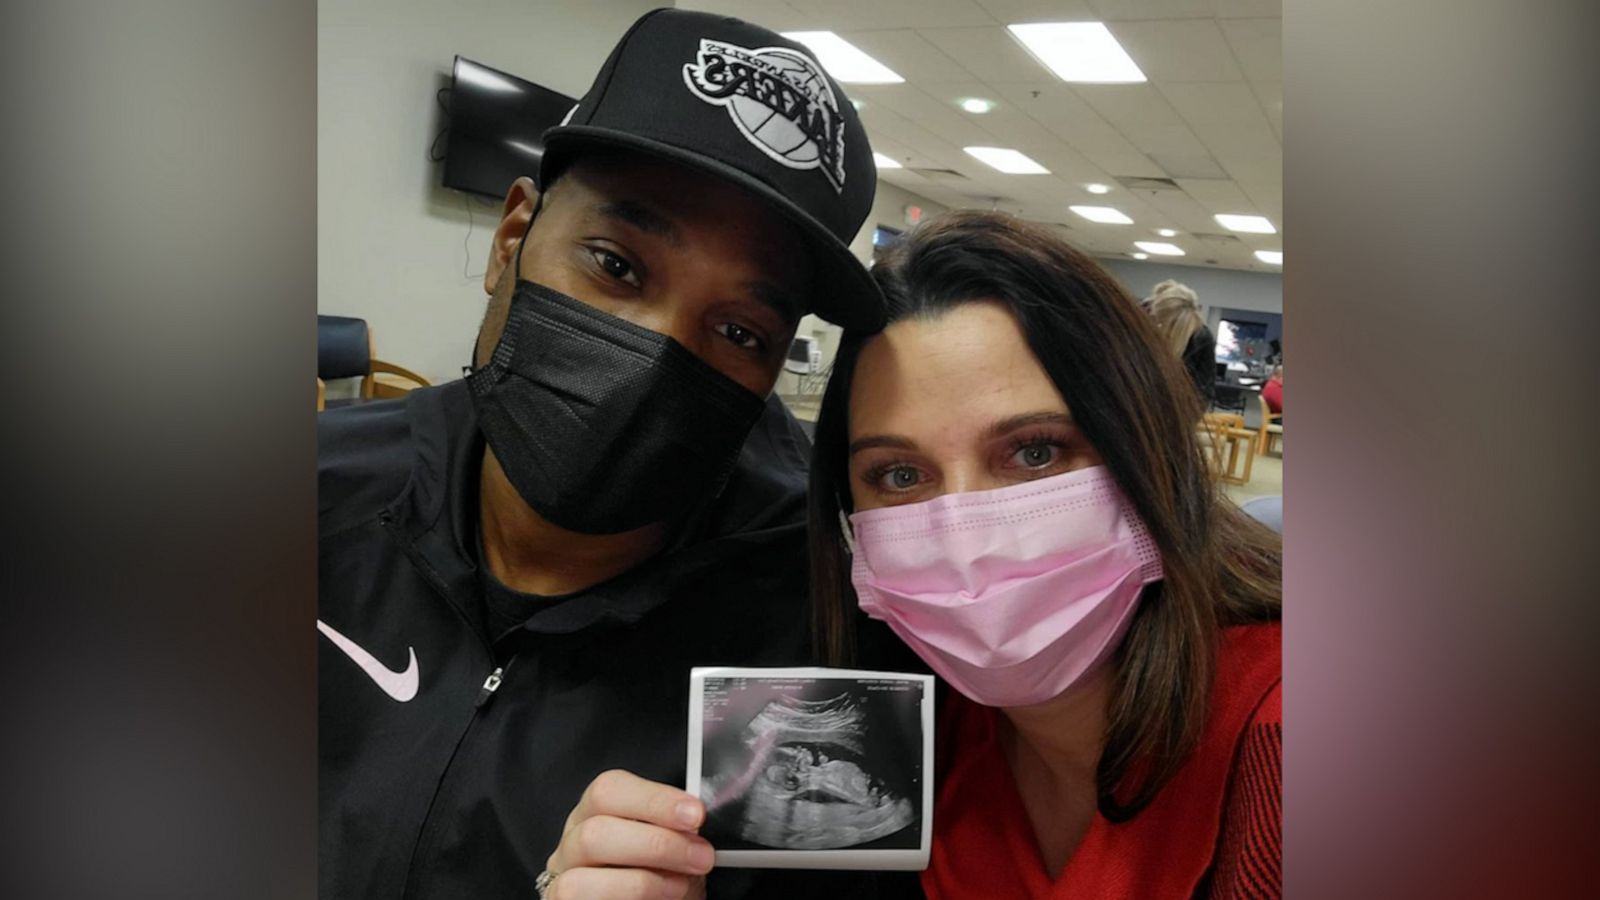 VIDEO: Husband sold his sneakers to pay for wife's IVF. Now she's over 4 months pregnant